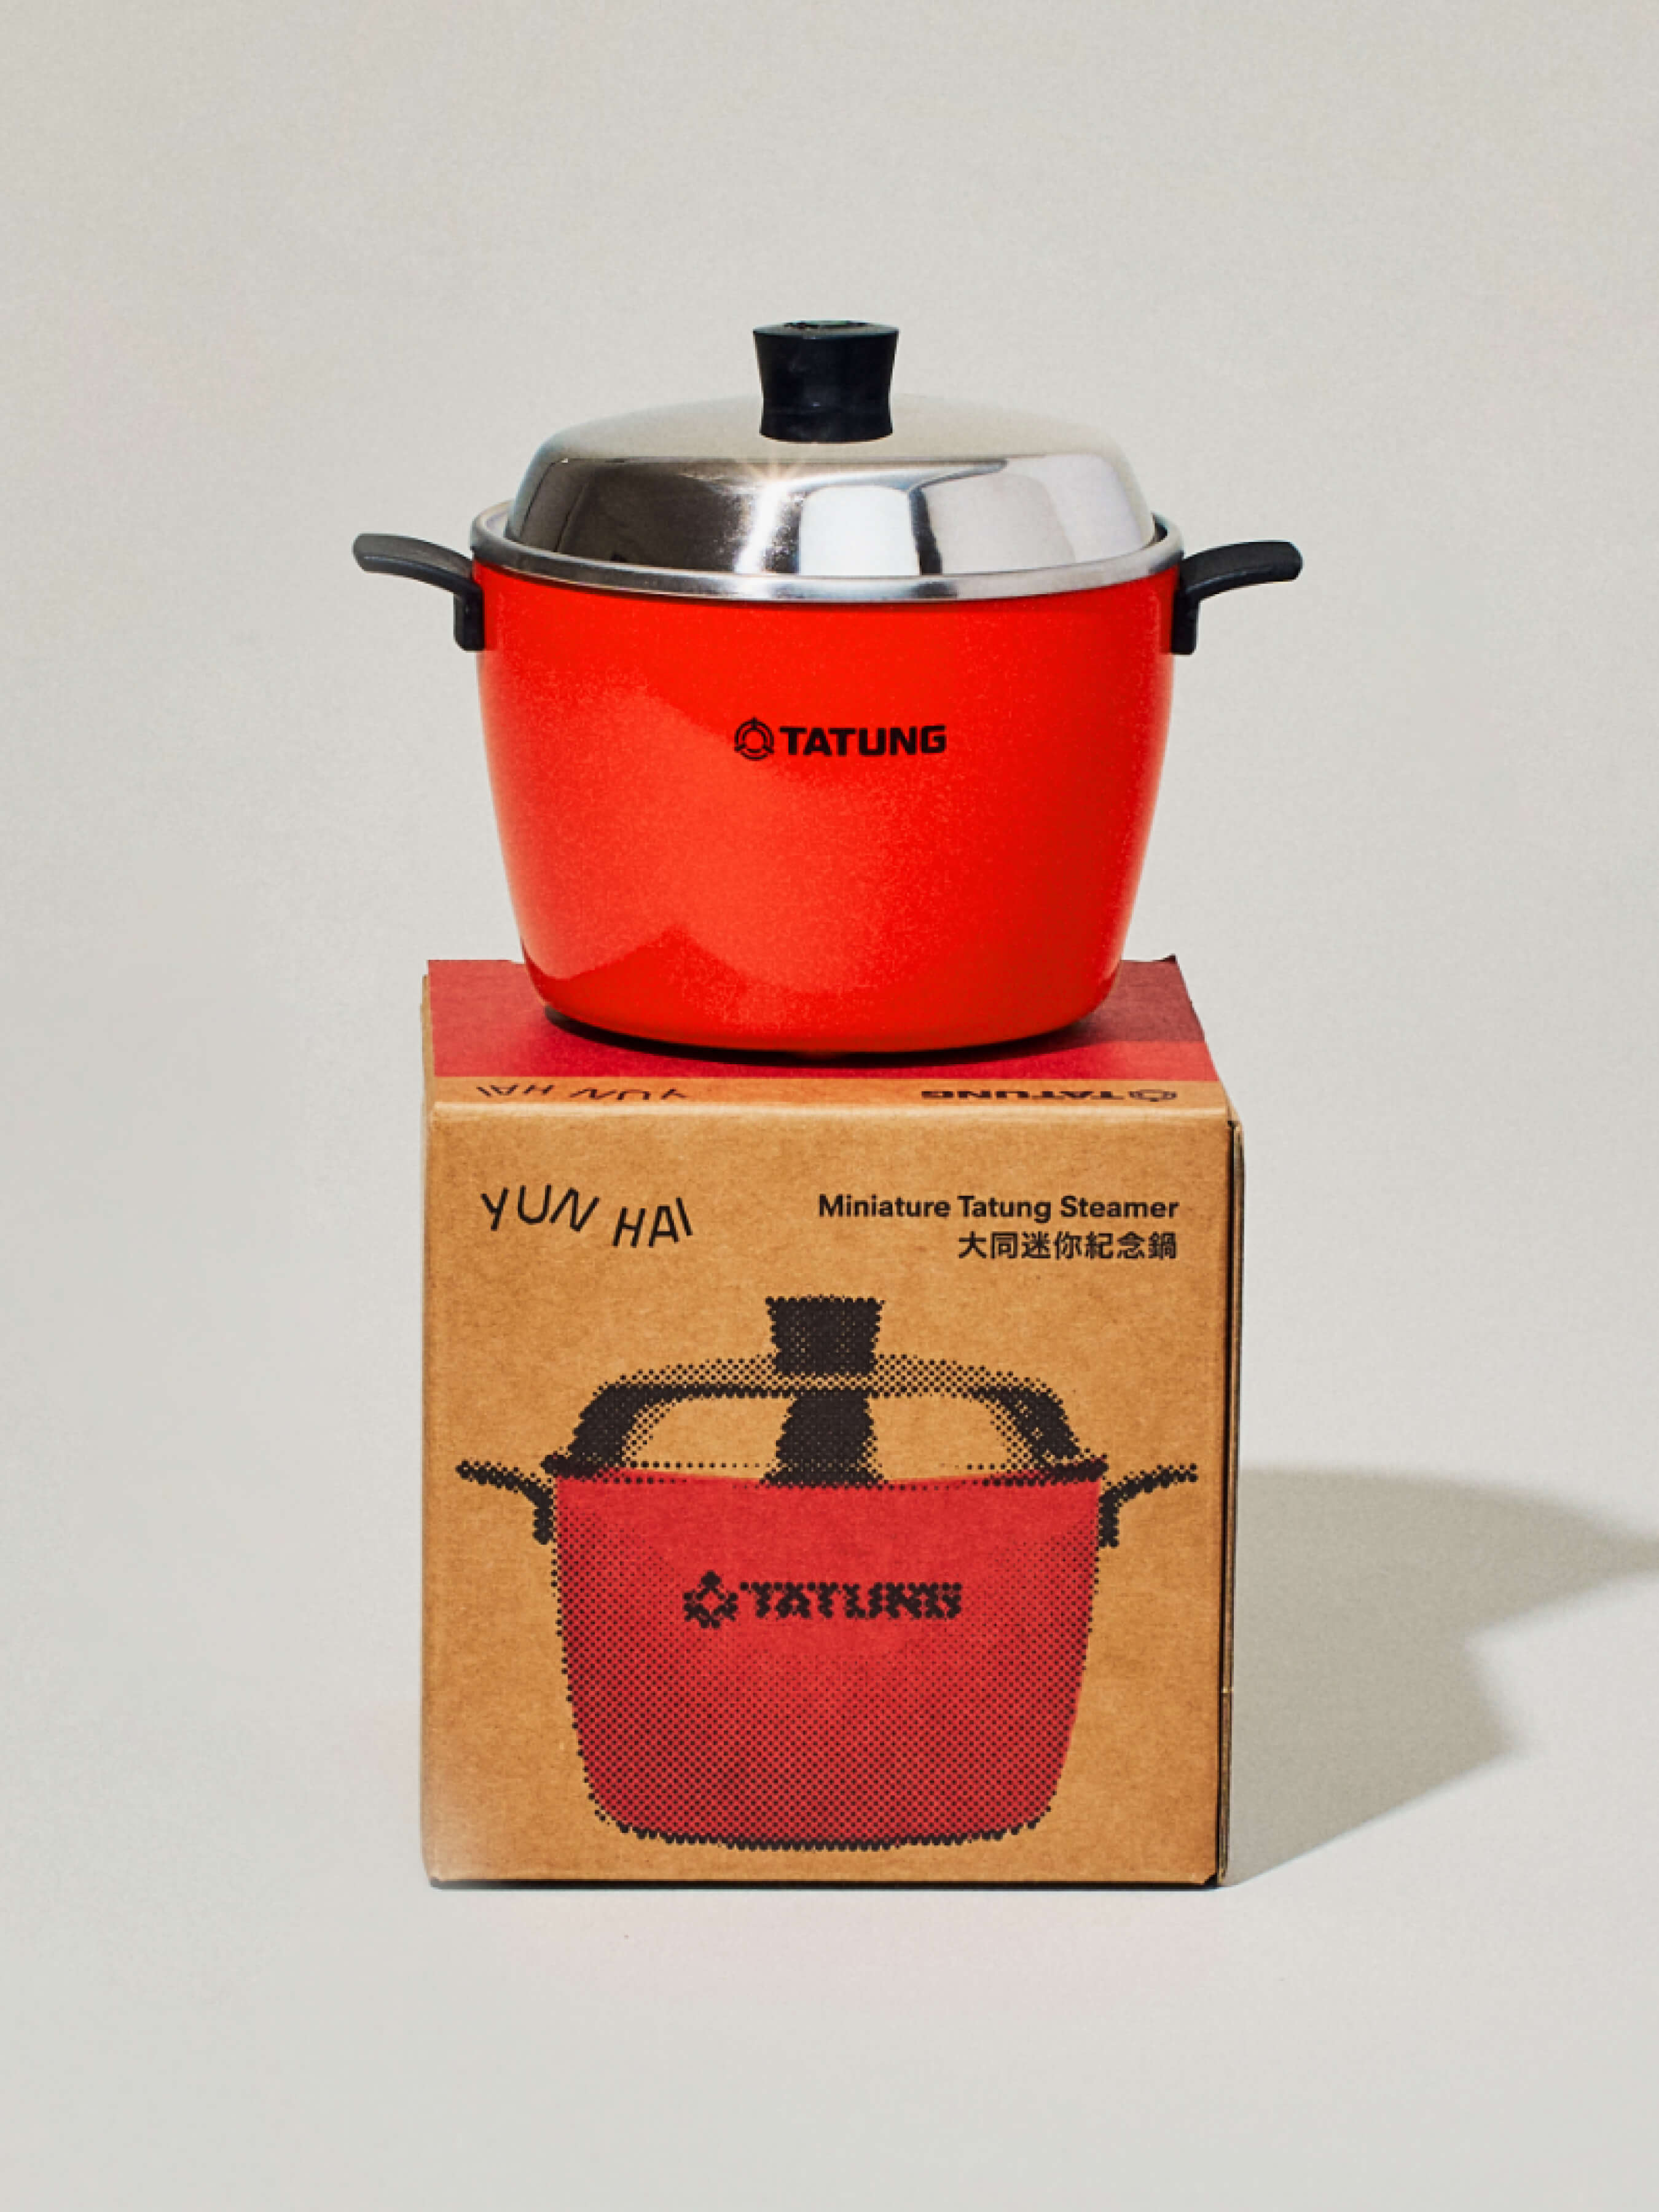 Limited Edition Tatung Miniature Steamer Bundle (Red and Green)